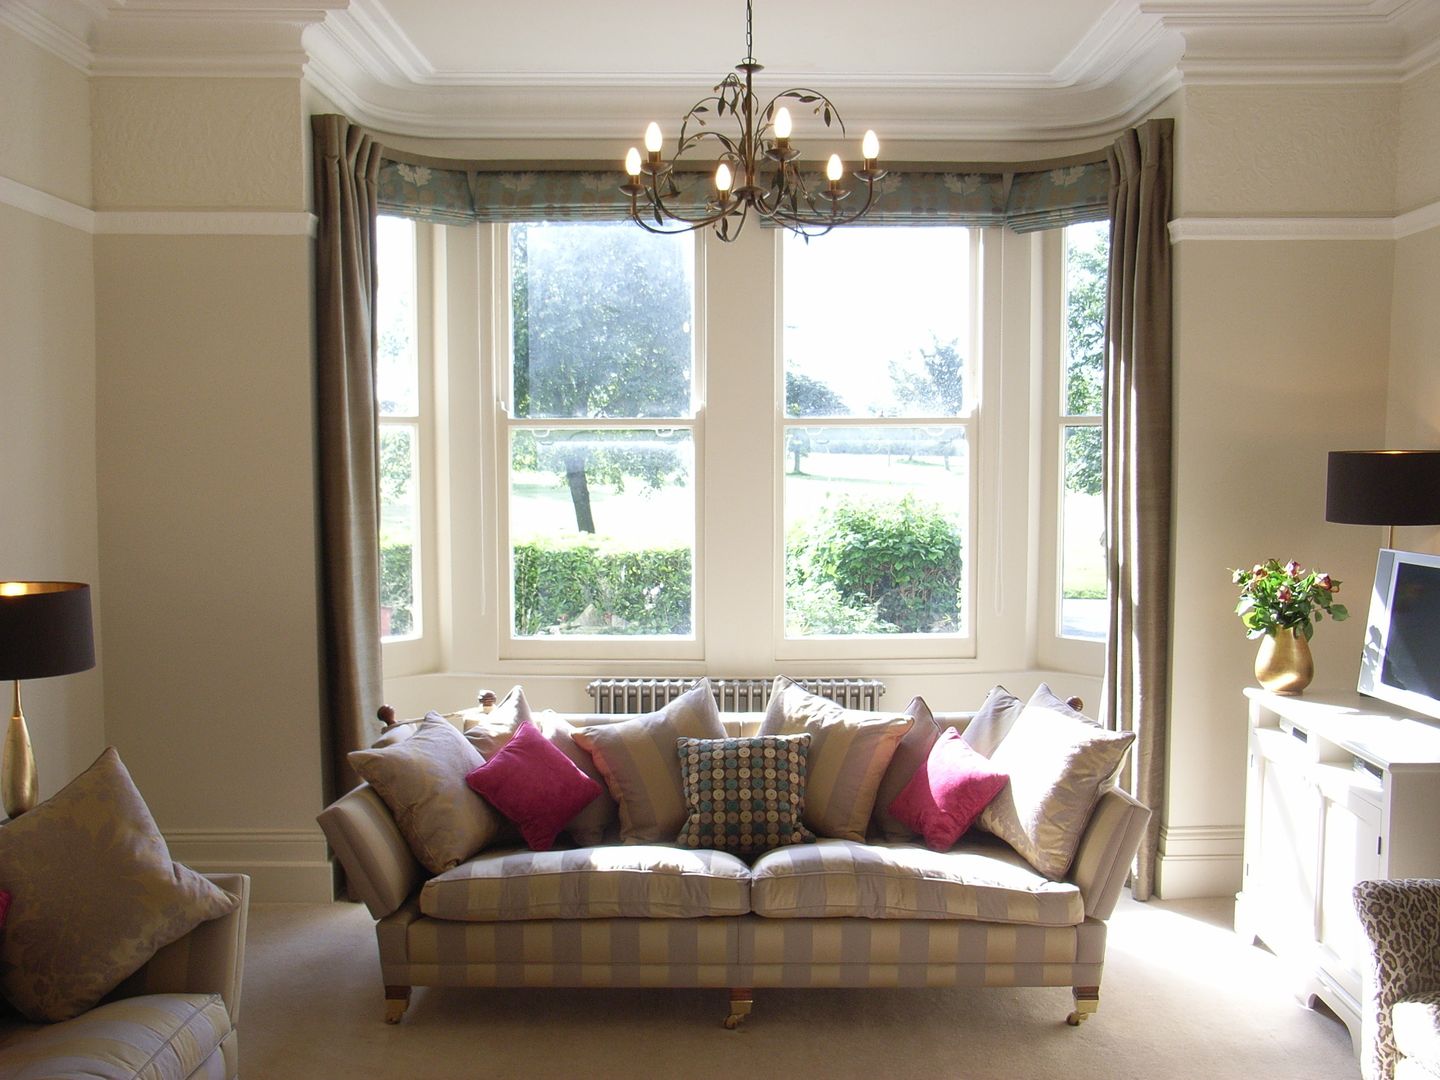 Classic View of Contemporised Victorian Living Room homify Salas / recibidores large bay window,roman blinds,dress curtains,victorian home,victorian property,classic sofa,large sofa,taupe colour scheme,pink accents,living room decor,living room furnish